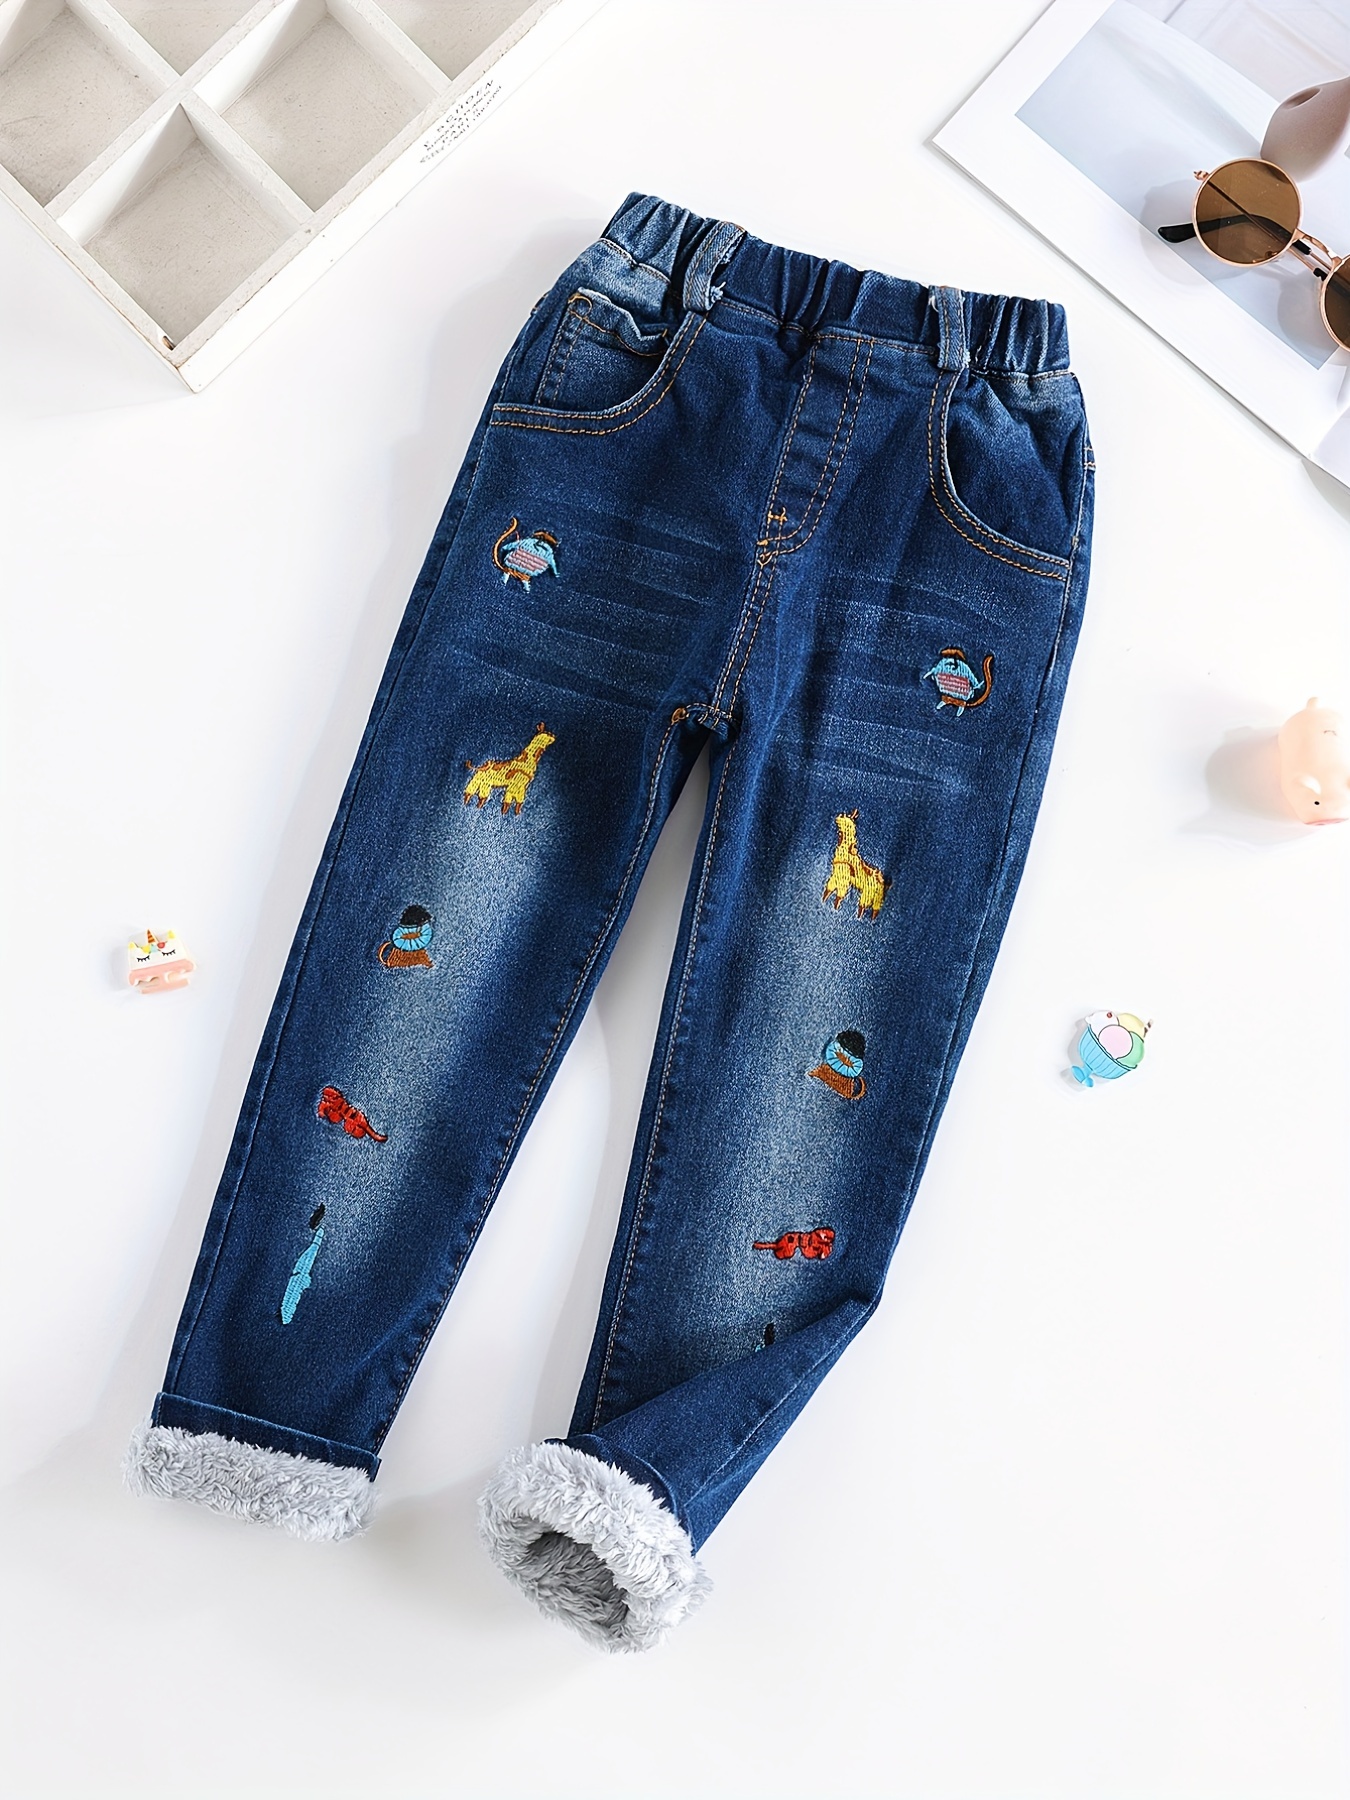 Kids Girls Jeans Unique Denim Pants Star Printed Trousers Ripped